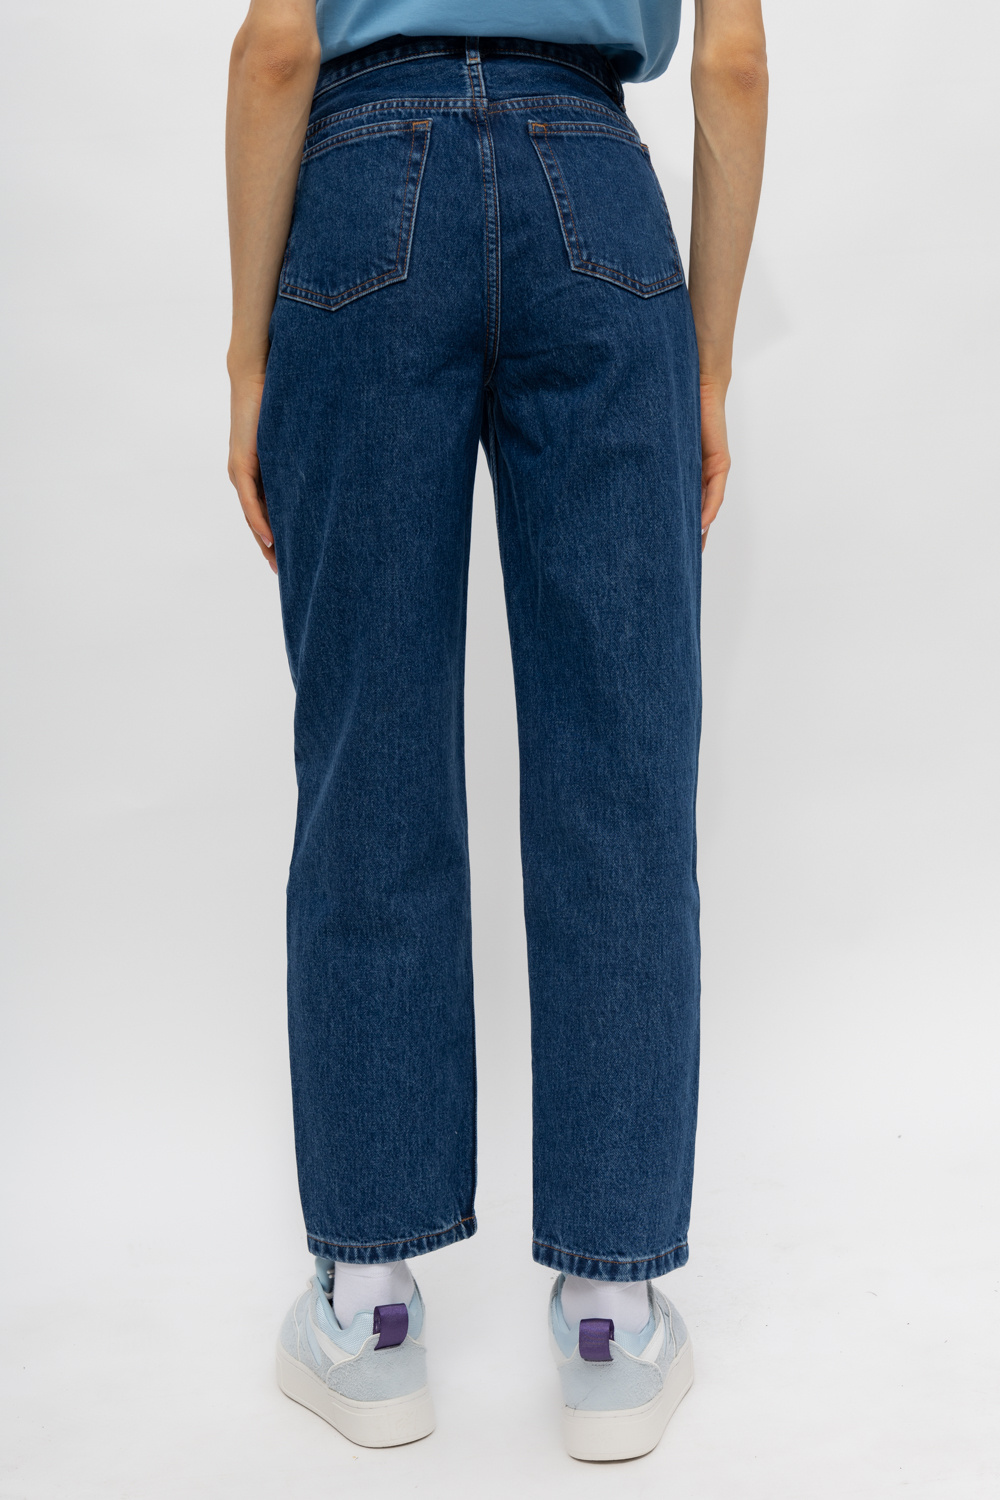 A.P.C. mid-rise two-tone flared jeans